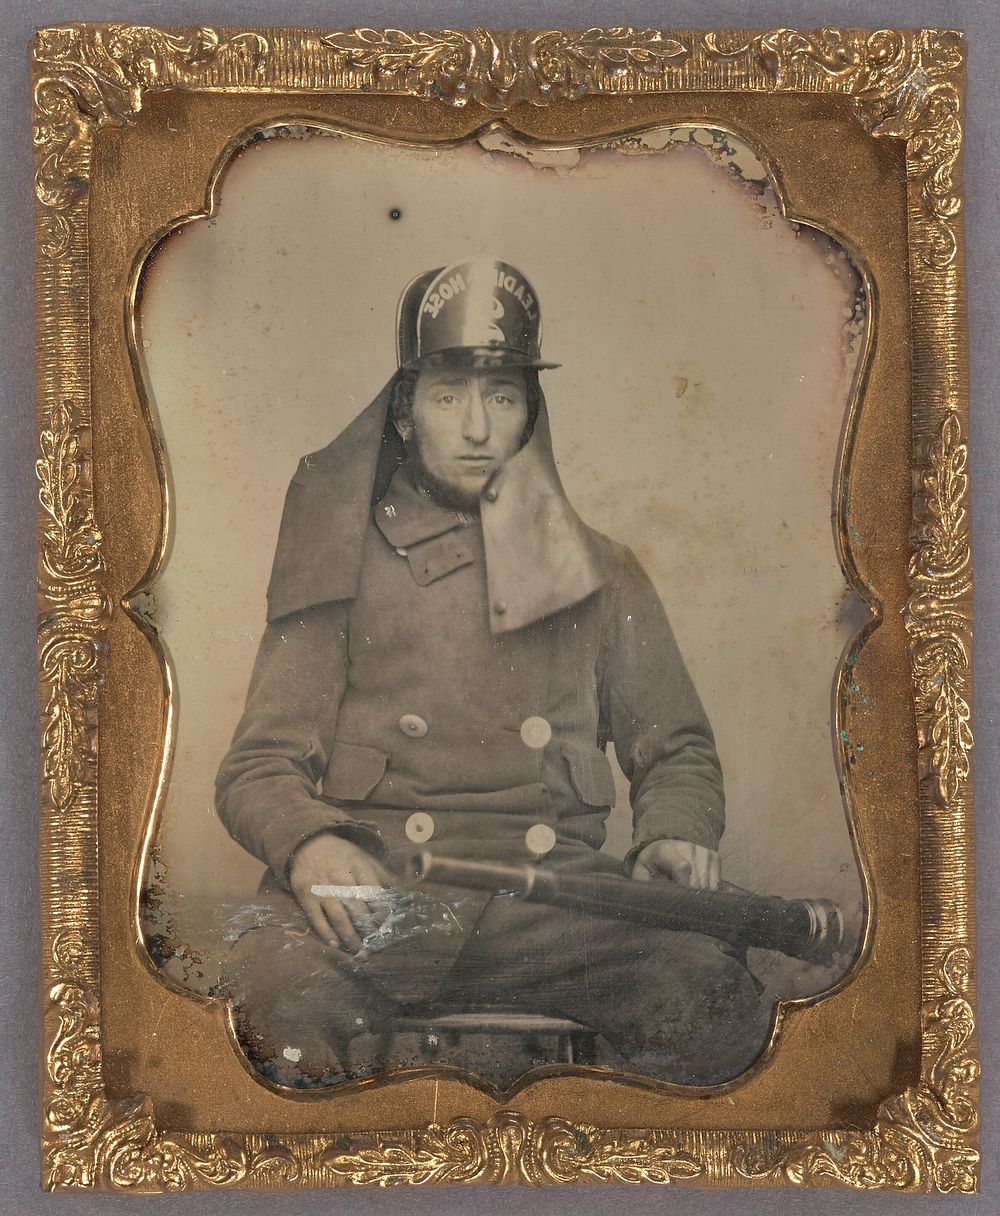 Portrait of an Seated Unidentified Fireman by Fish and Company